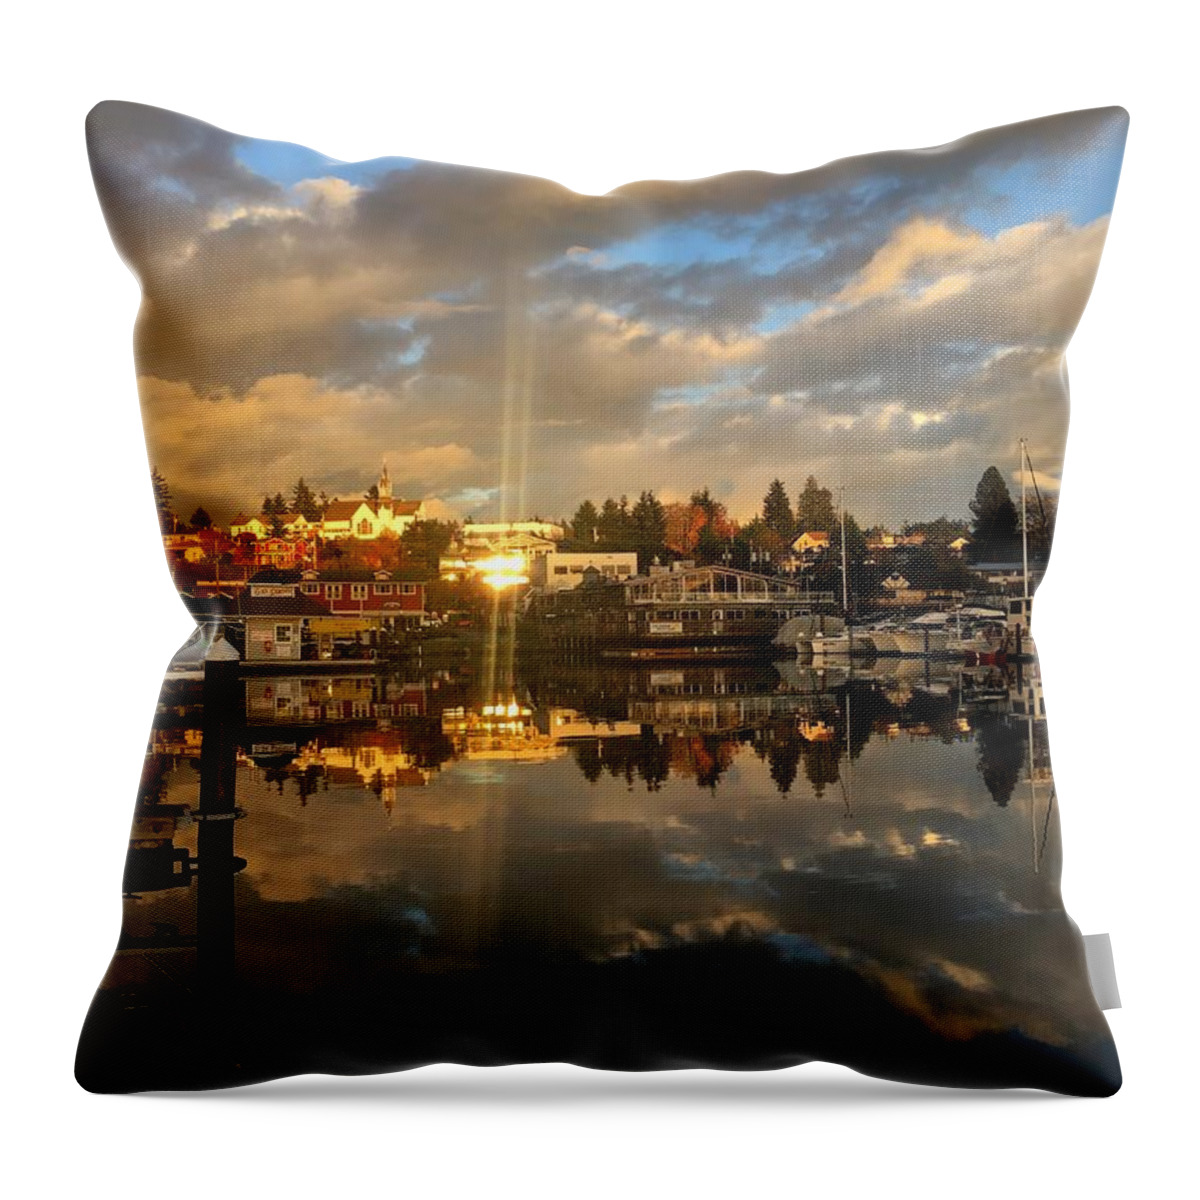 Poulsbo Throw Pillow featuring the photograph Poulsbo Sunset Reflection by Jerry Abbott